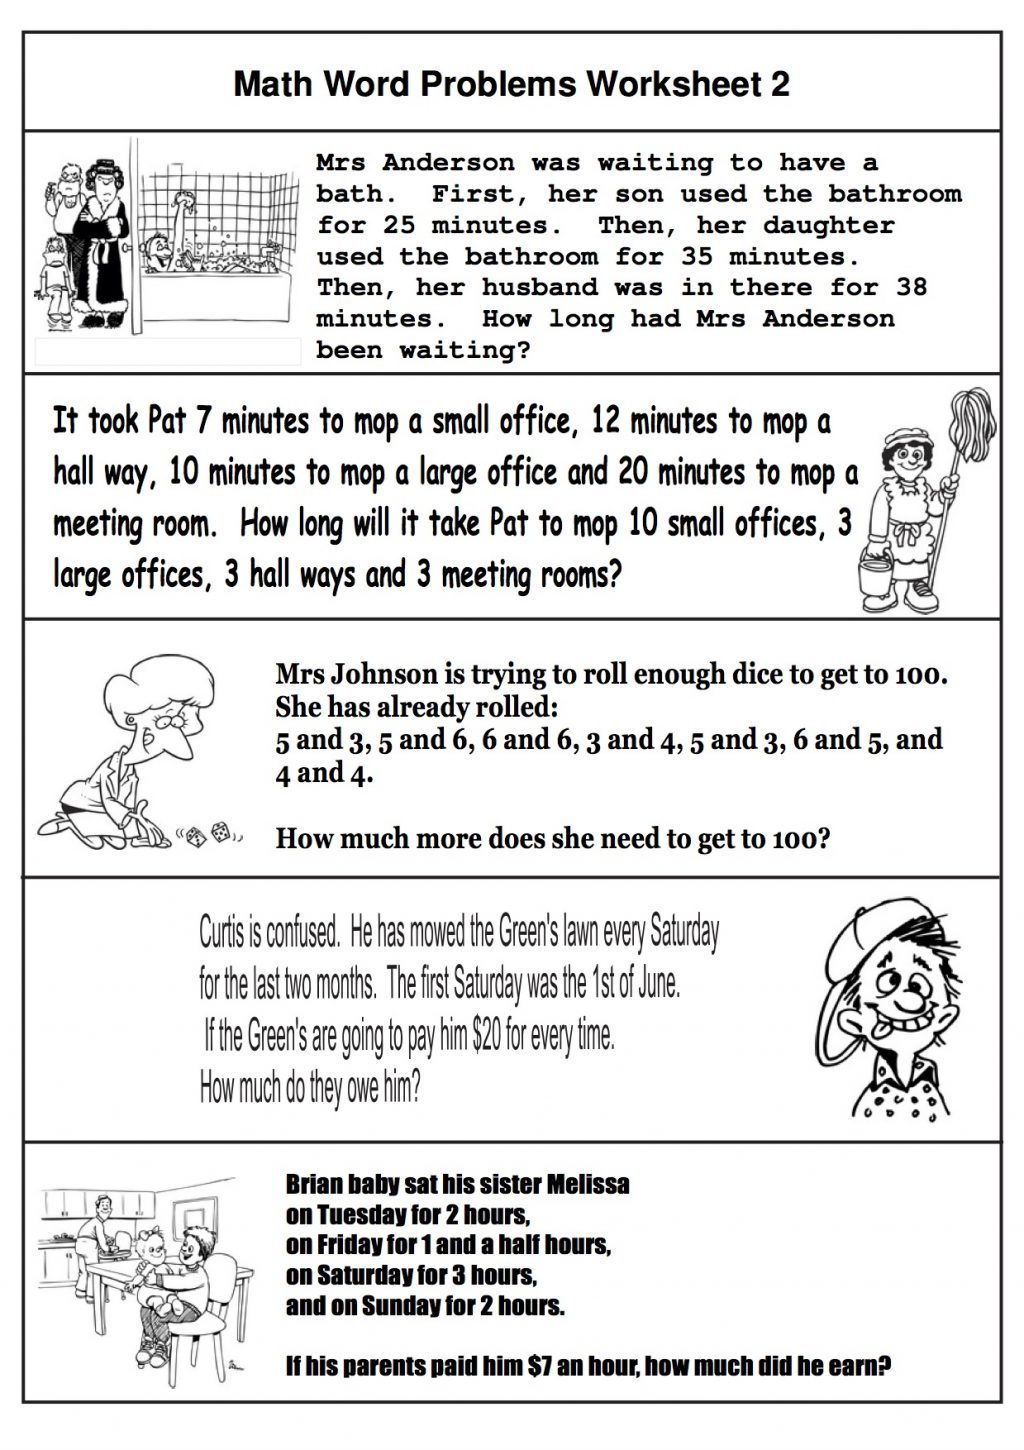 4th-grade-number-math-word-problems-math-words-multi-step-word-problems